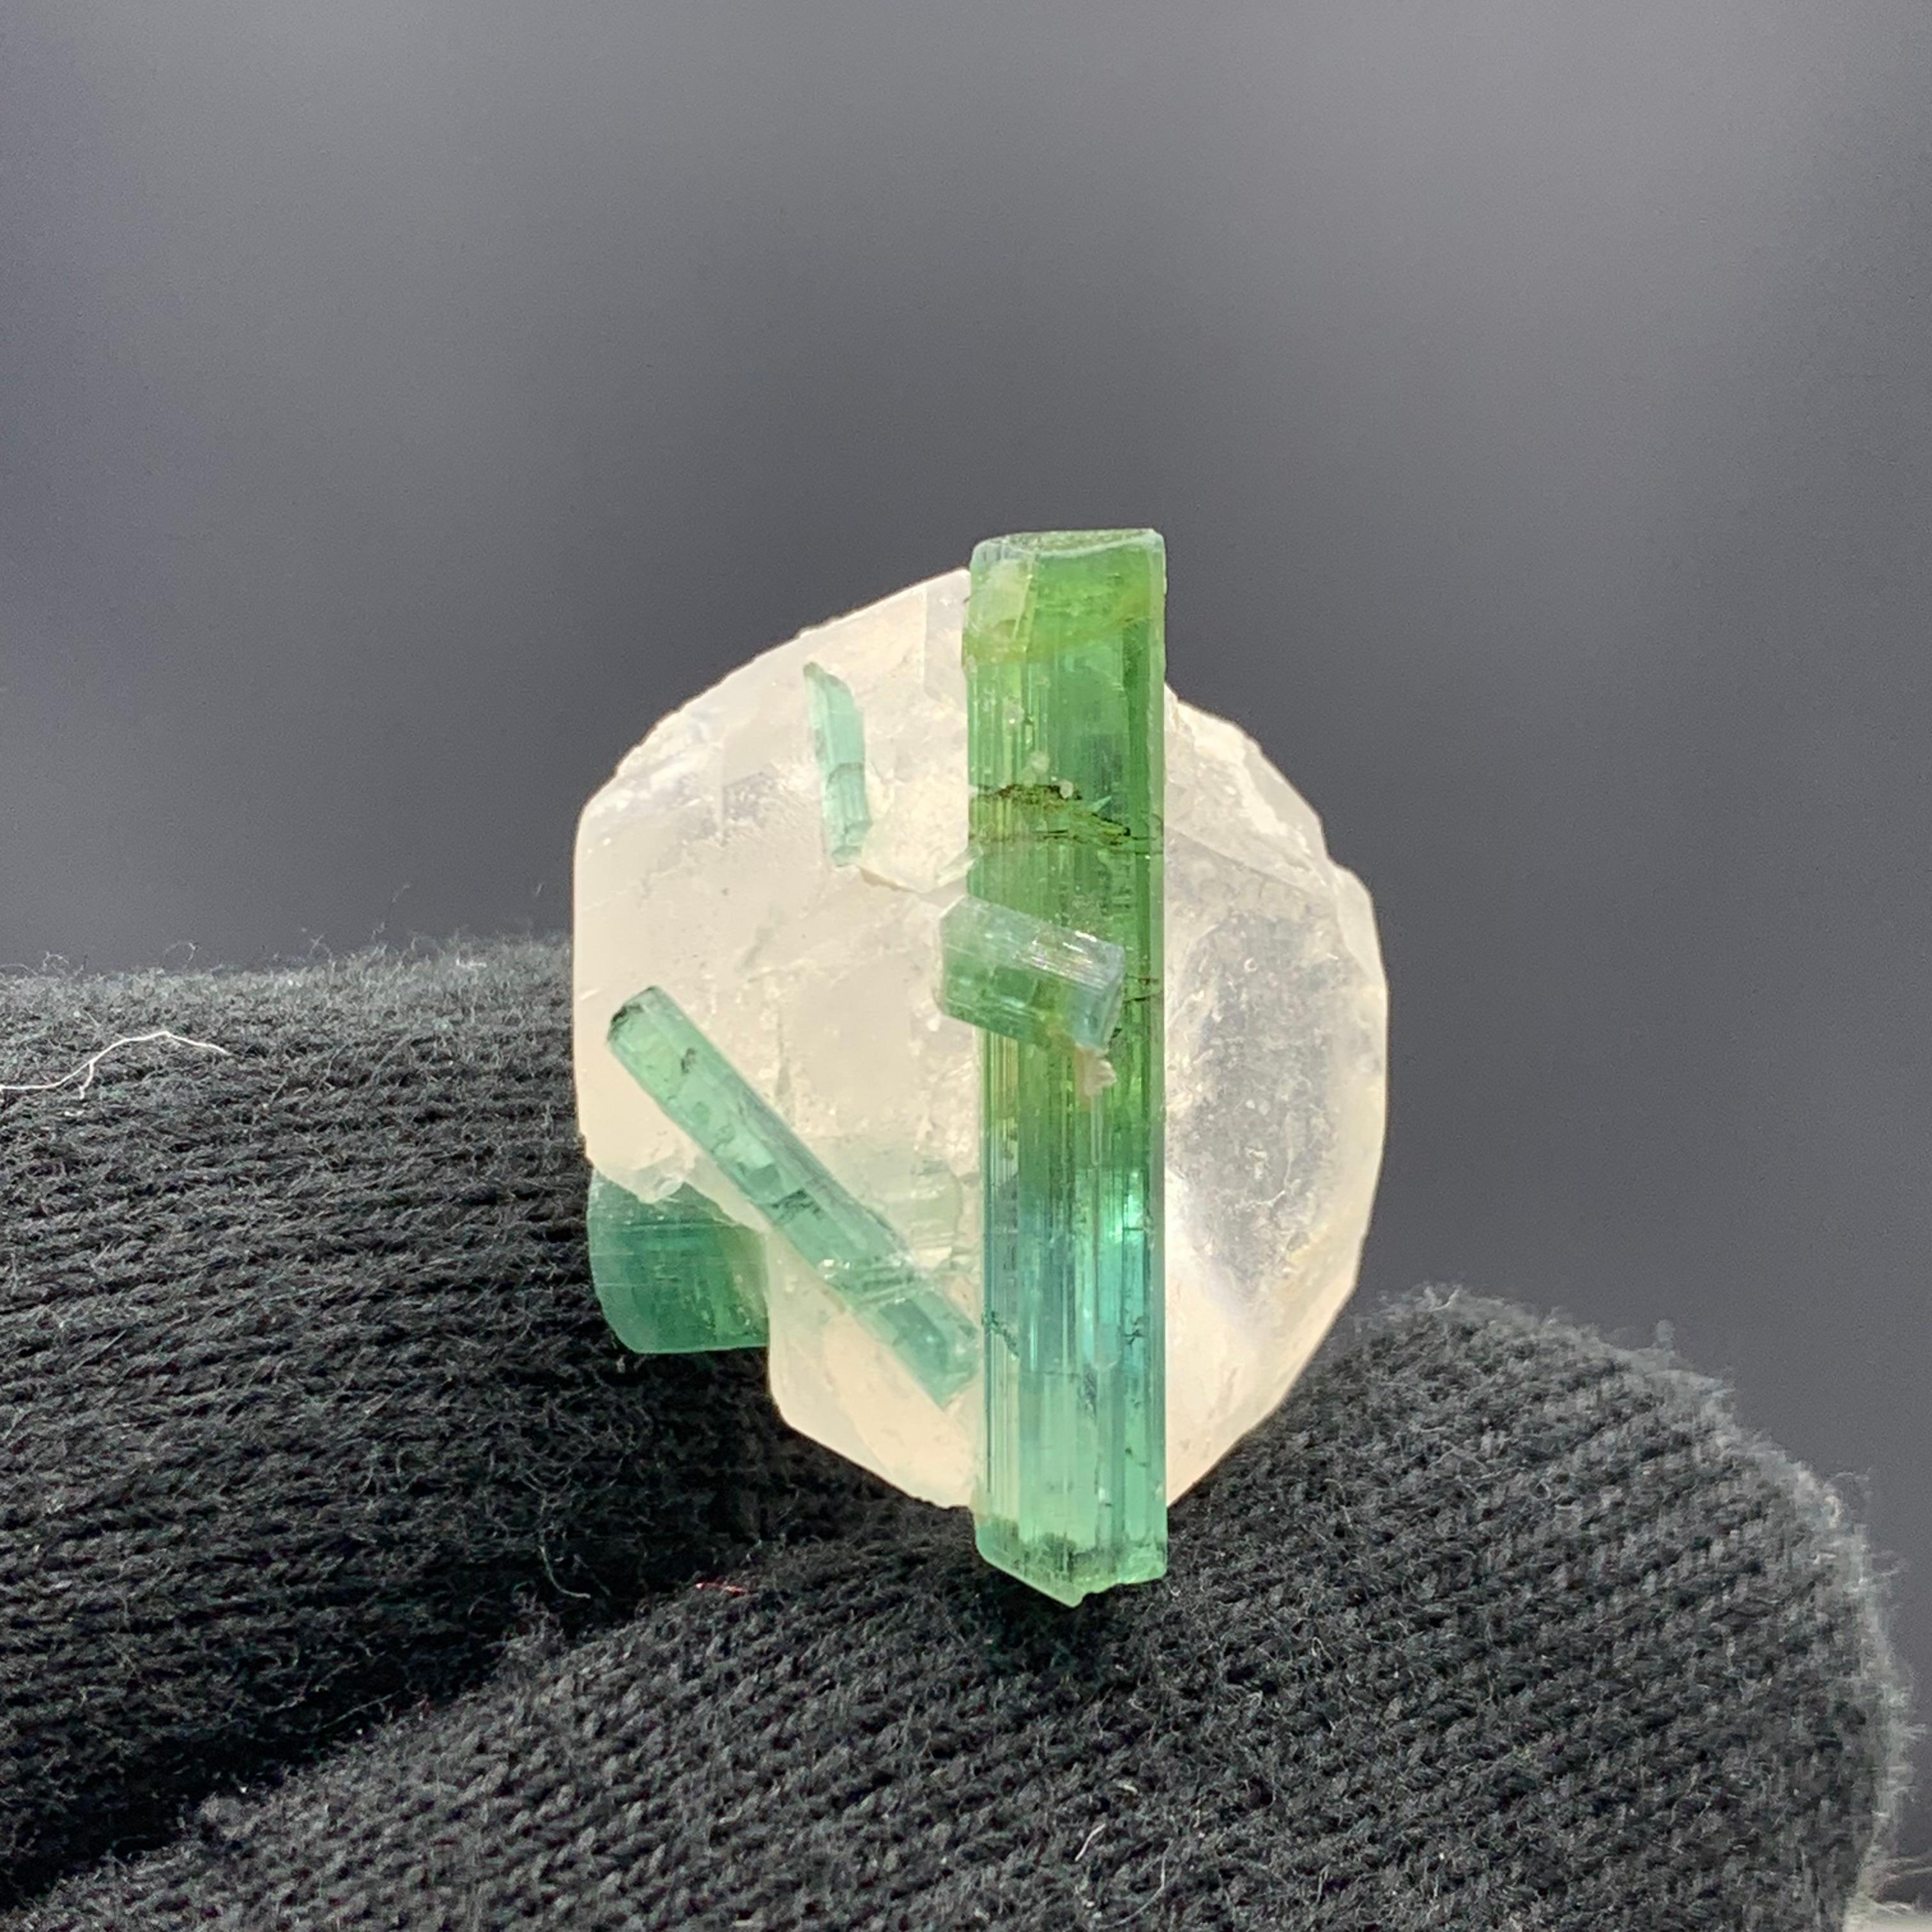 8.45 Gram Pretty Bi Color Tourmaline Crystals Attached With Quartz Specimen 

Weight: 8.45 Gram
Dimension: 2.4 x 1.9 x 1.7 Cm
Origin: Afghanistan 

Tourmaline is a crystalline silicate mineral group in which boron is compounded with elements such as